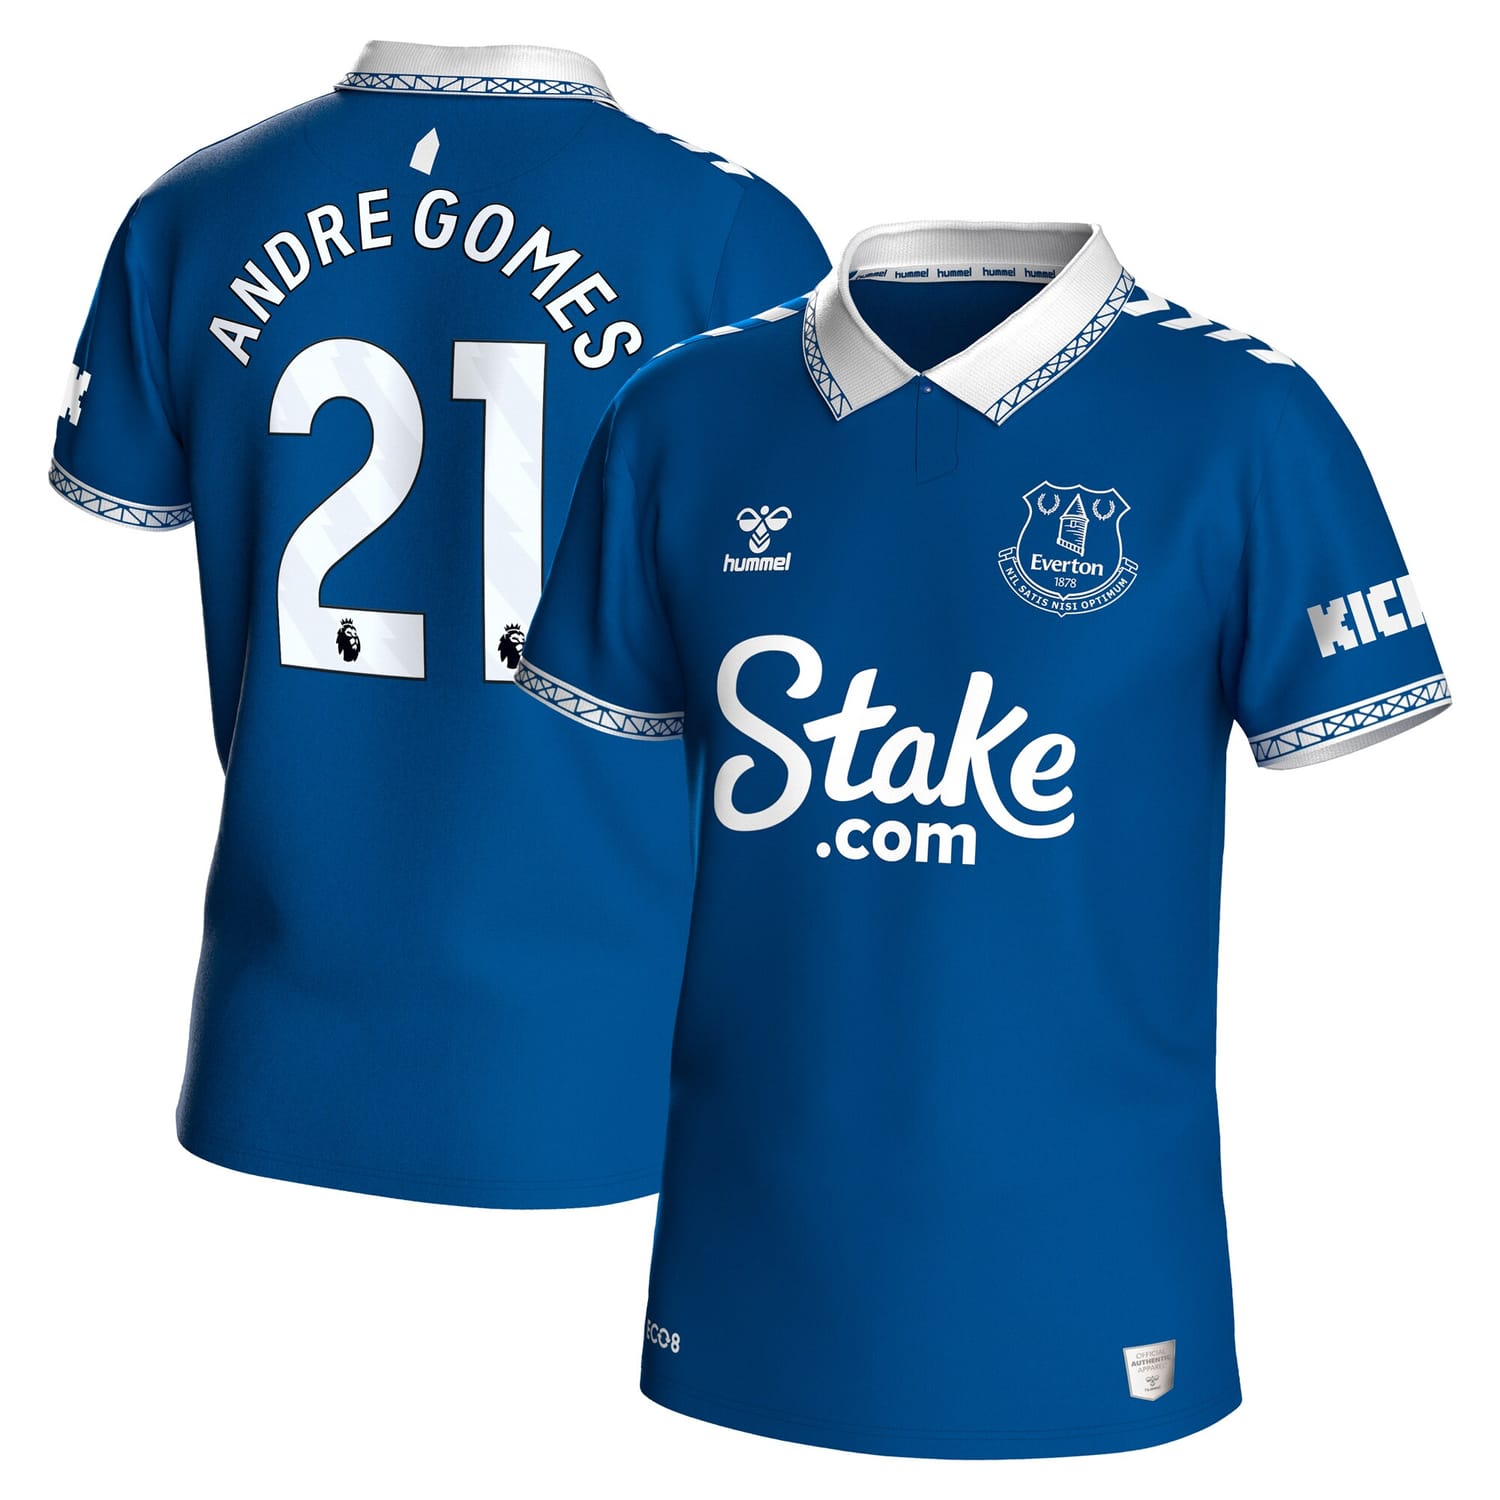 Premier League Everton Home Jersey Shirt 2023-24 player Andre Gomes 21 printing for Men